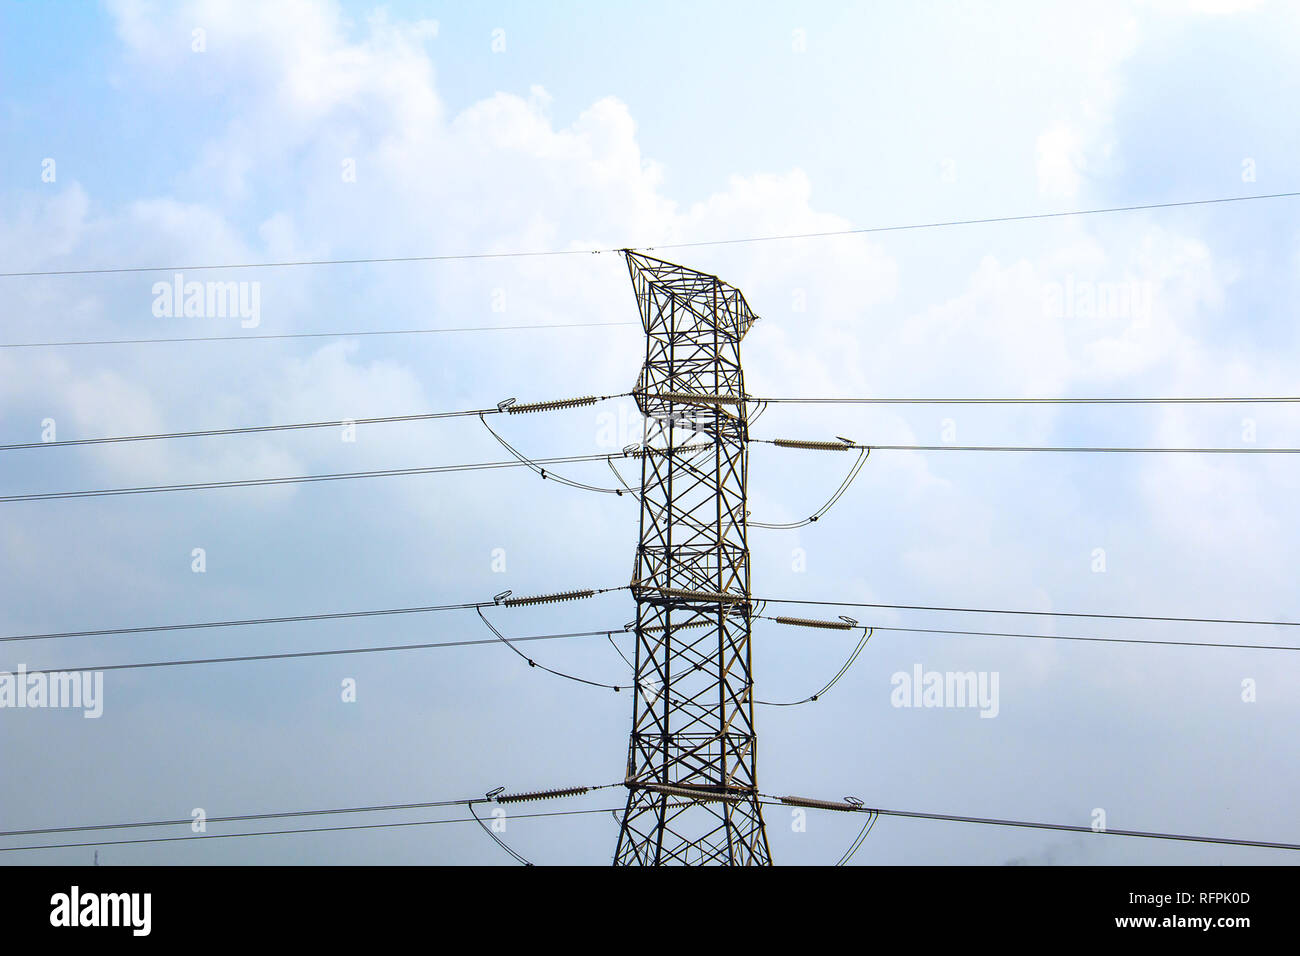 High-voltage electric power lines against a blue sky with white clouds Stock Photo